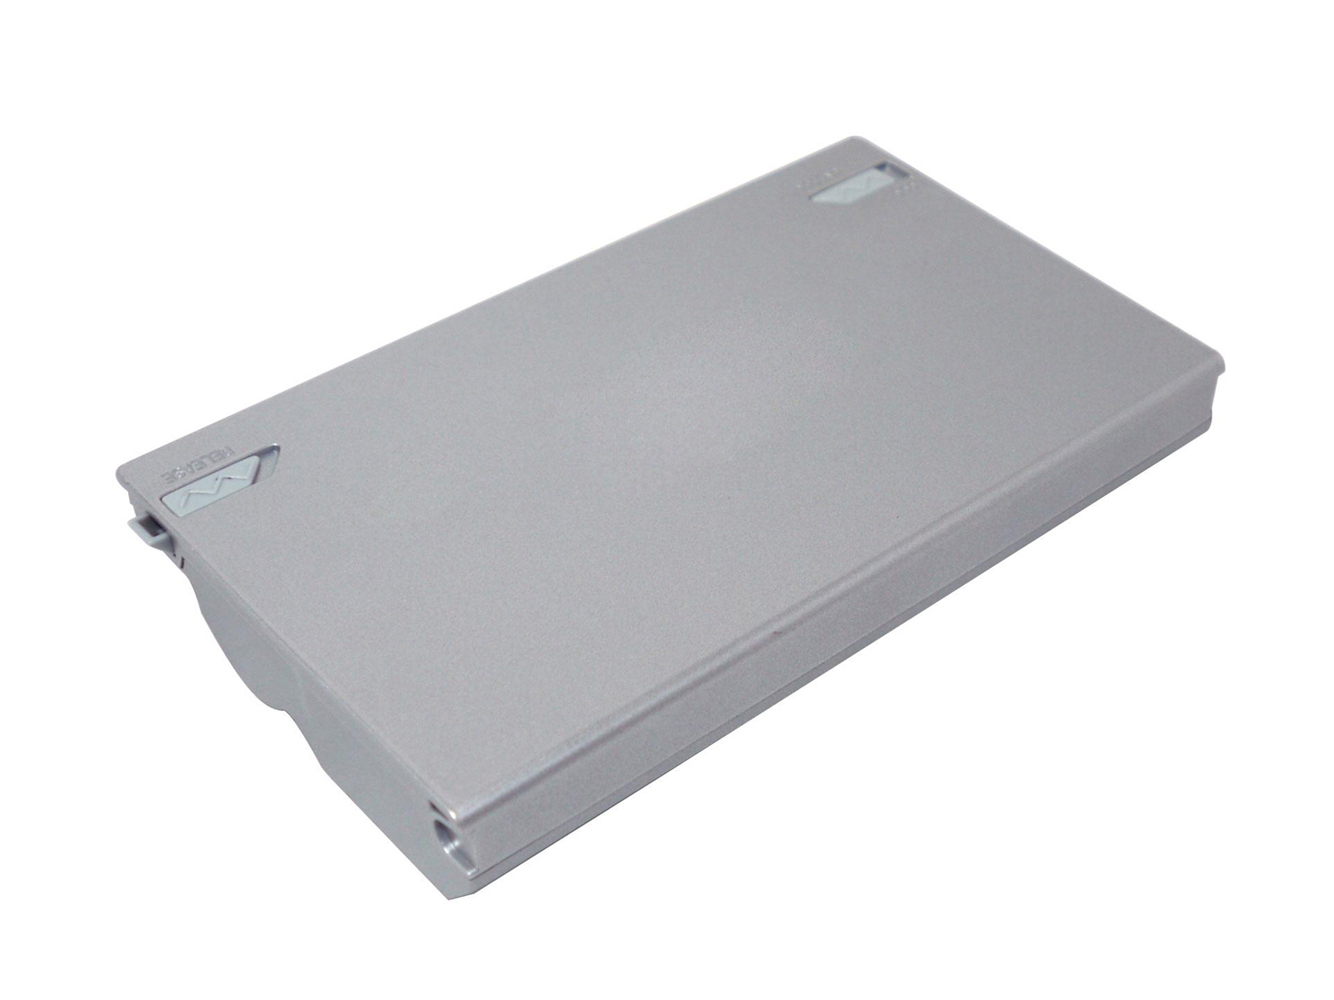 Replacement for SONY PCG-394L, VAIO VGC-LB15, SONY VAIO VGC-LJ, VAIO VGN-FZ Series Laptop Battery